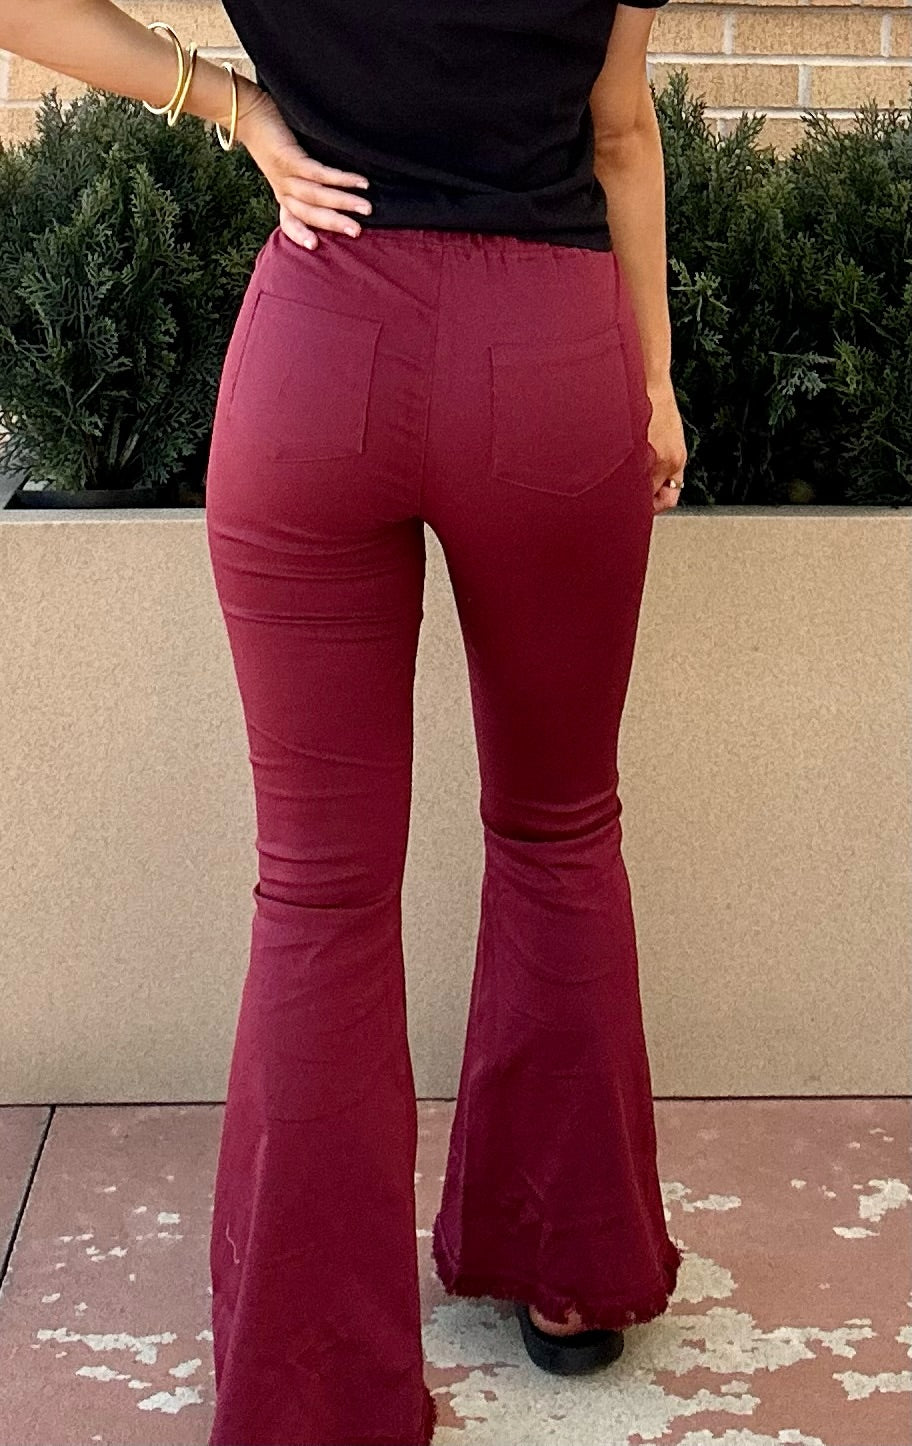 BACK VIEW OF PANTS